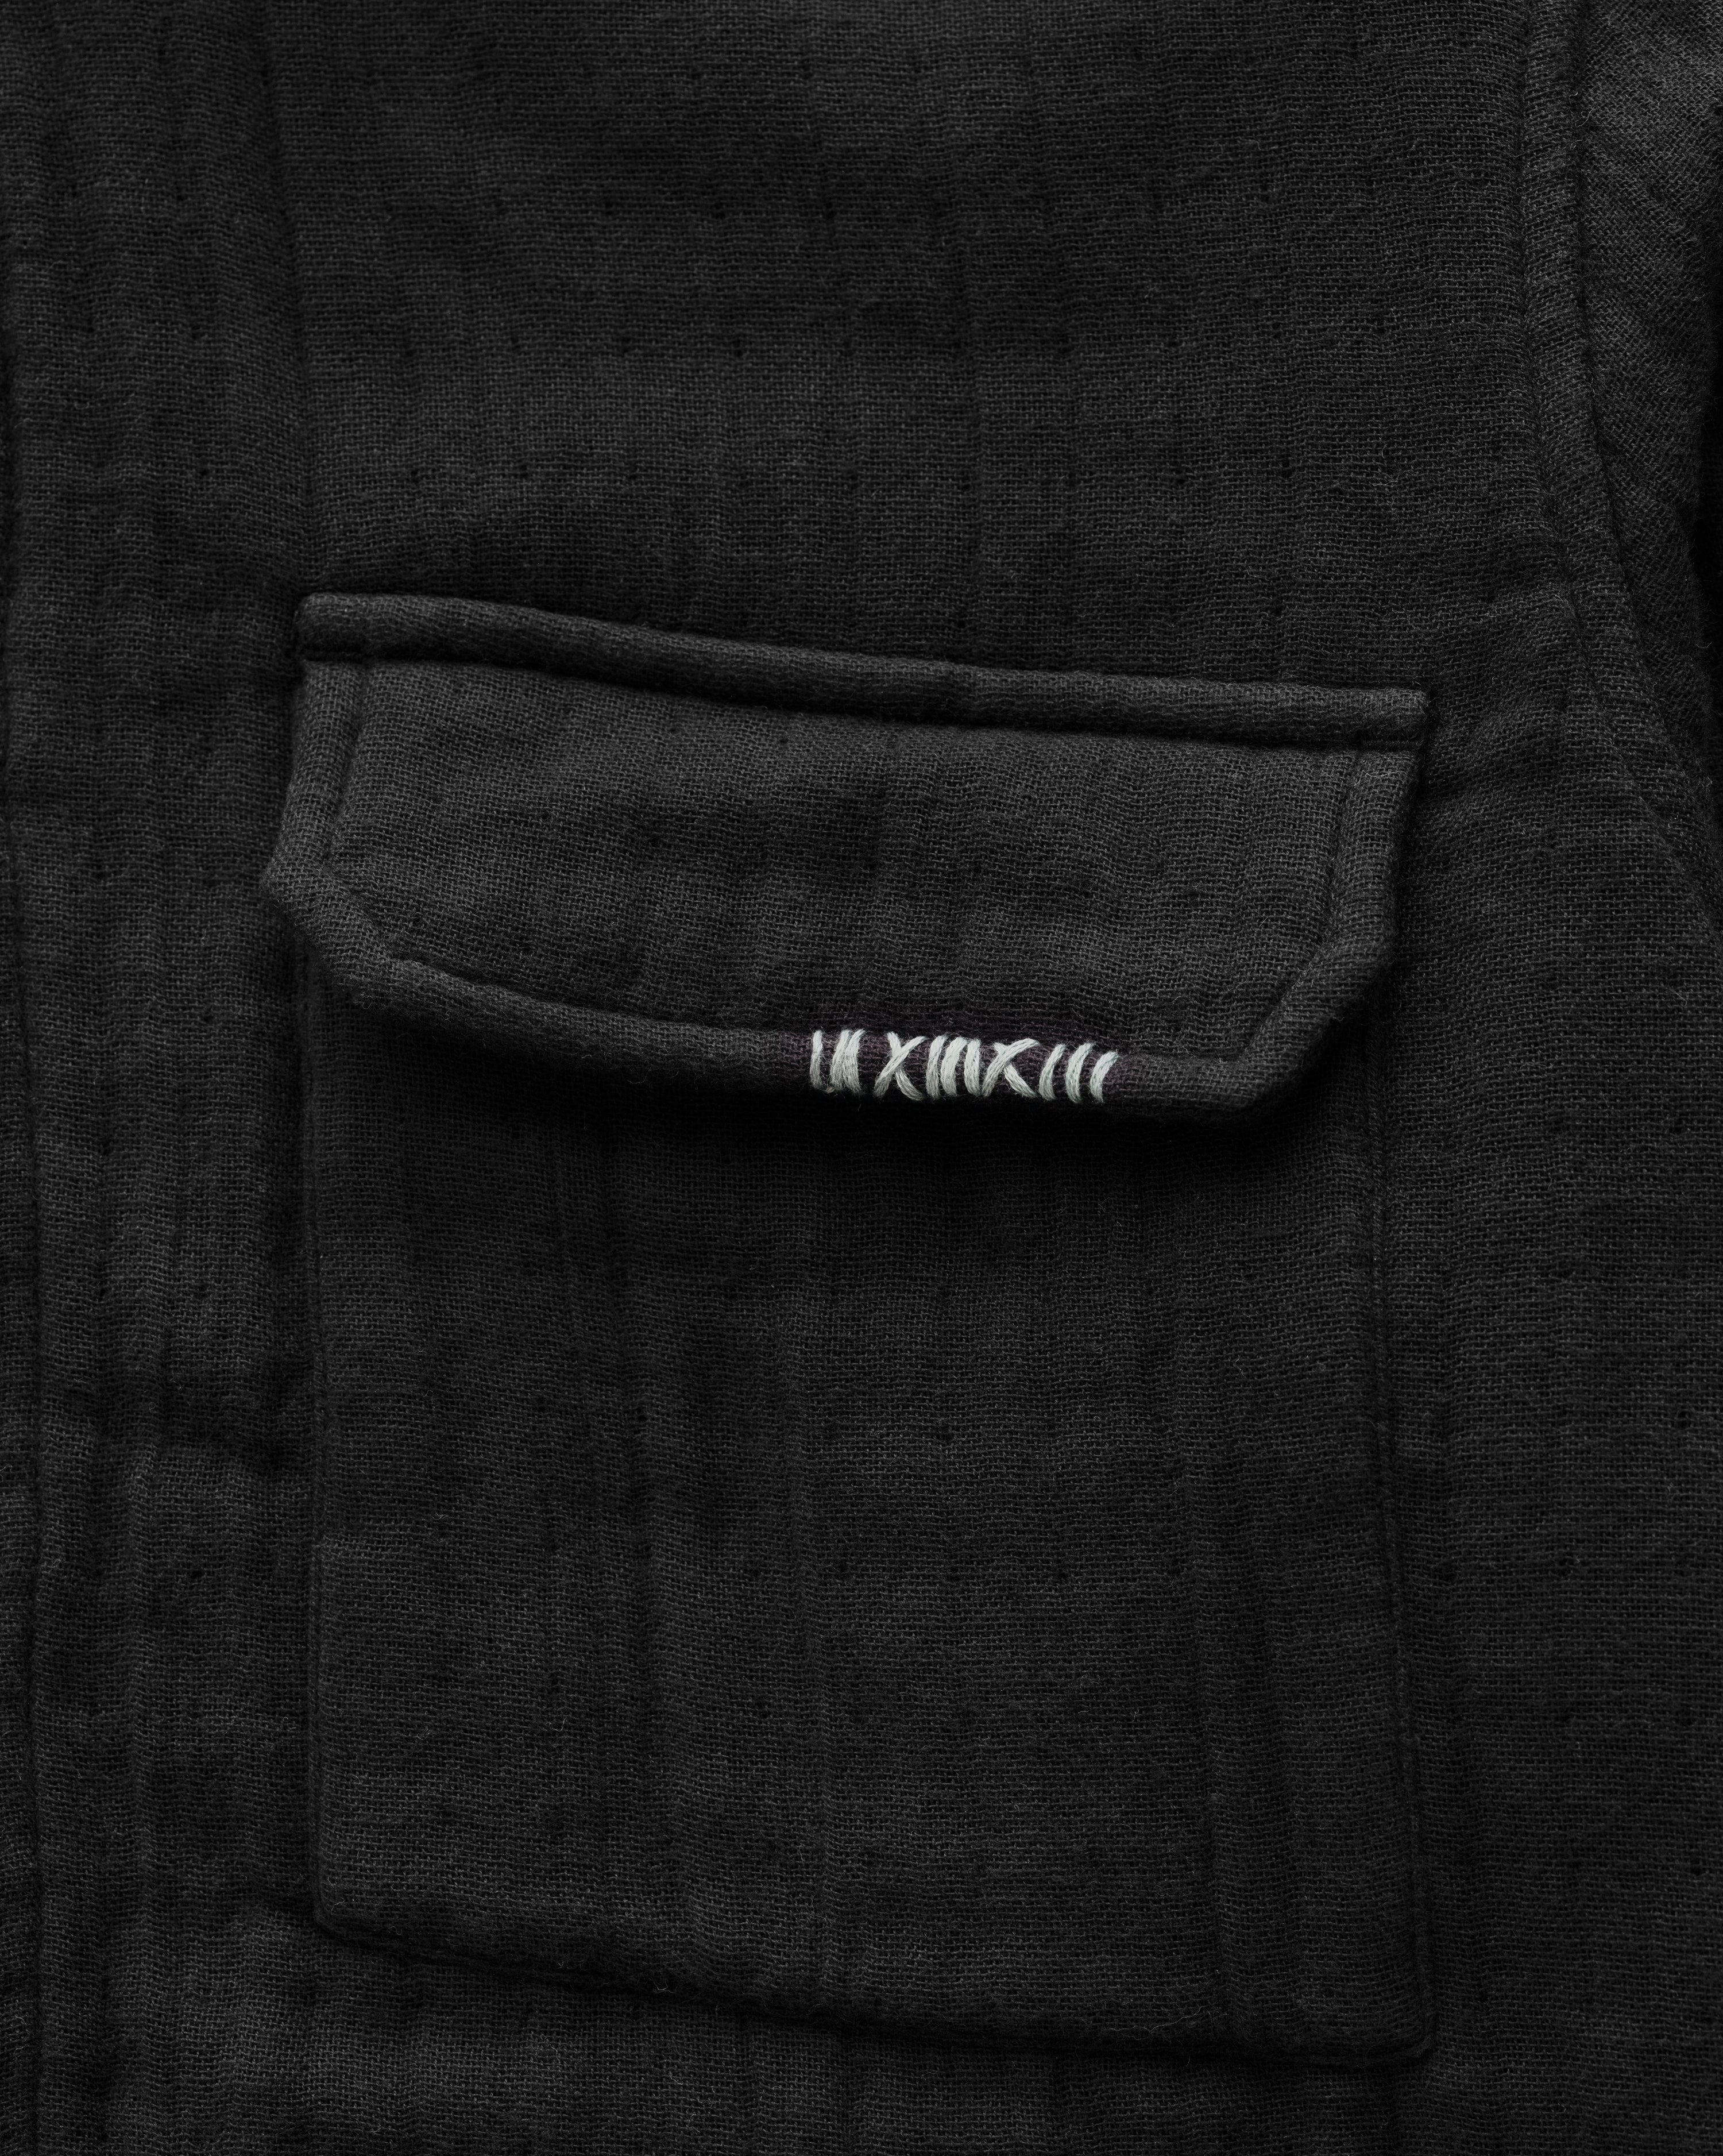 FIELD SHIRT - BLACK TRIPLE GAUZE COTTON WITH NATURALLY DYED HAND MENDING